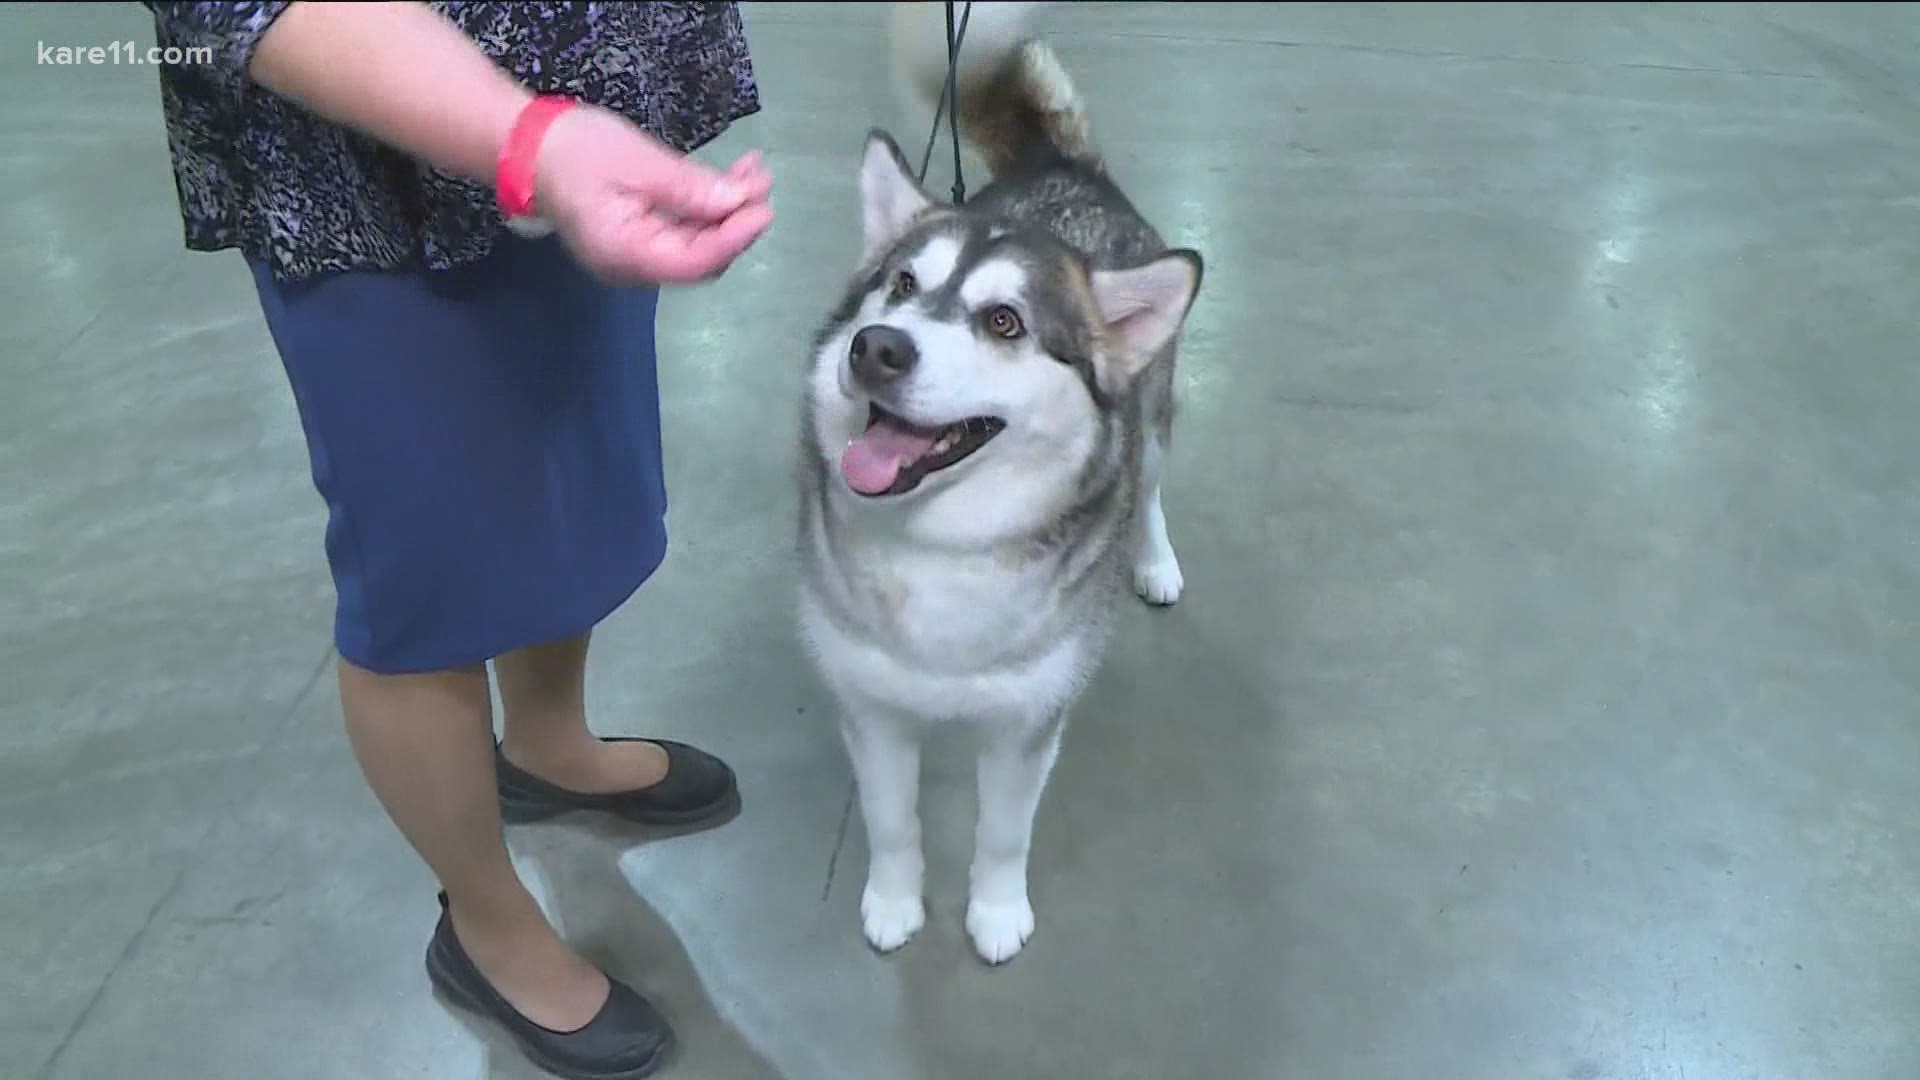 KARE 11 Saturday takes a live look at the annual dog show, which is back after a year off due to the pandemic.